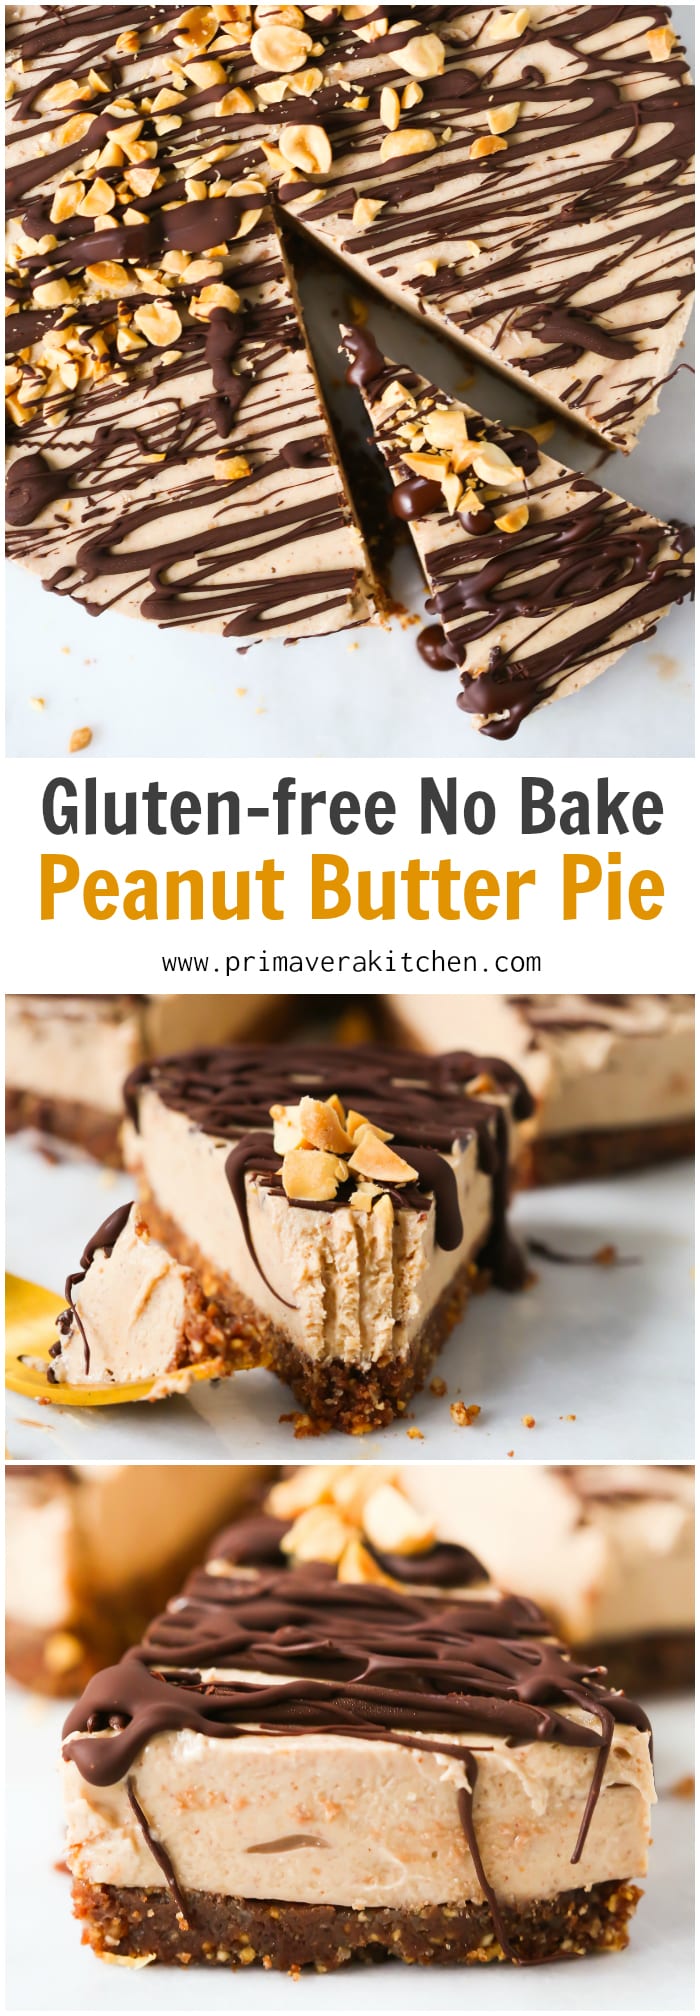 Gluten-free No Bake Peanut Butter Pie - This Gluten-free No Bake Peanut Butter Pie is very creamy, vegan, dairy-free, delicious and incredible easy to throw together.